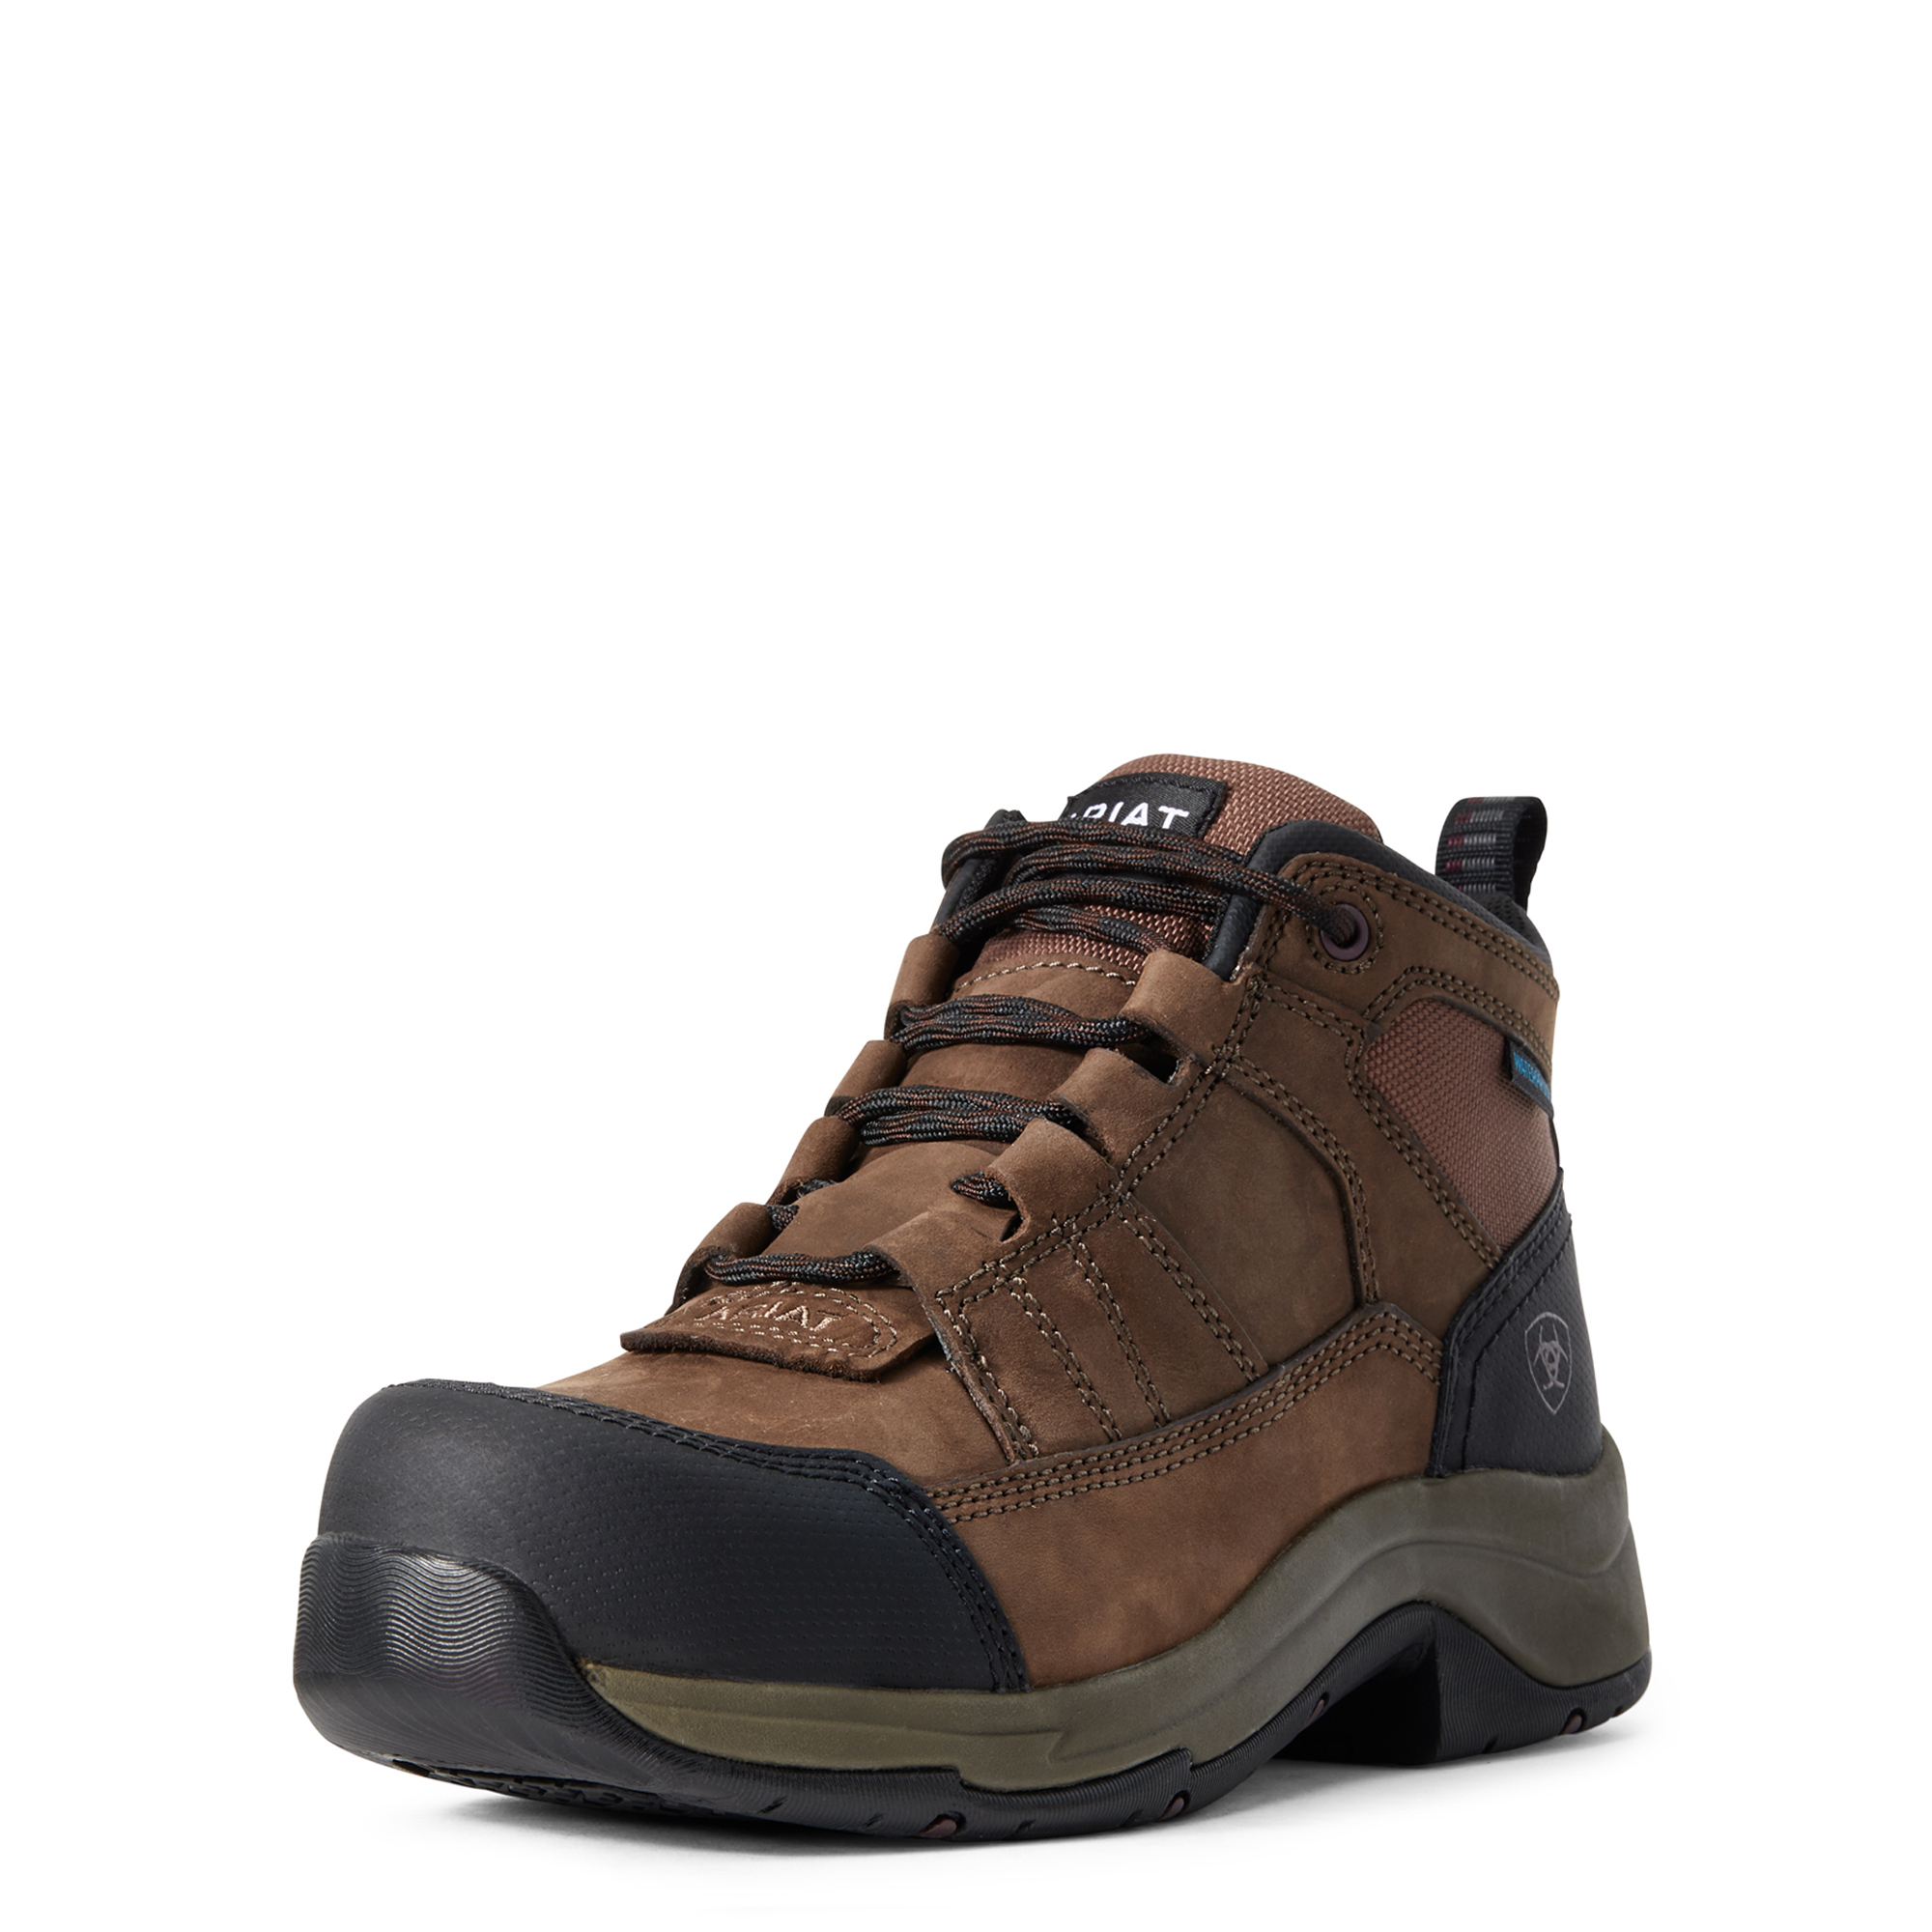 Ariat Women's Telluride Waterproof Work Boots with Composite Toe from Columbia Safety